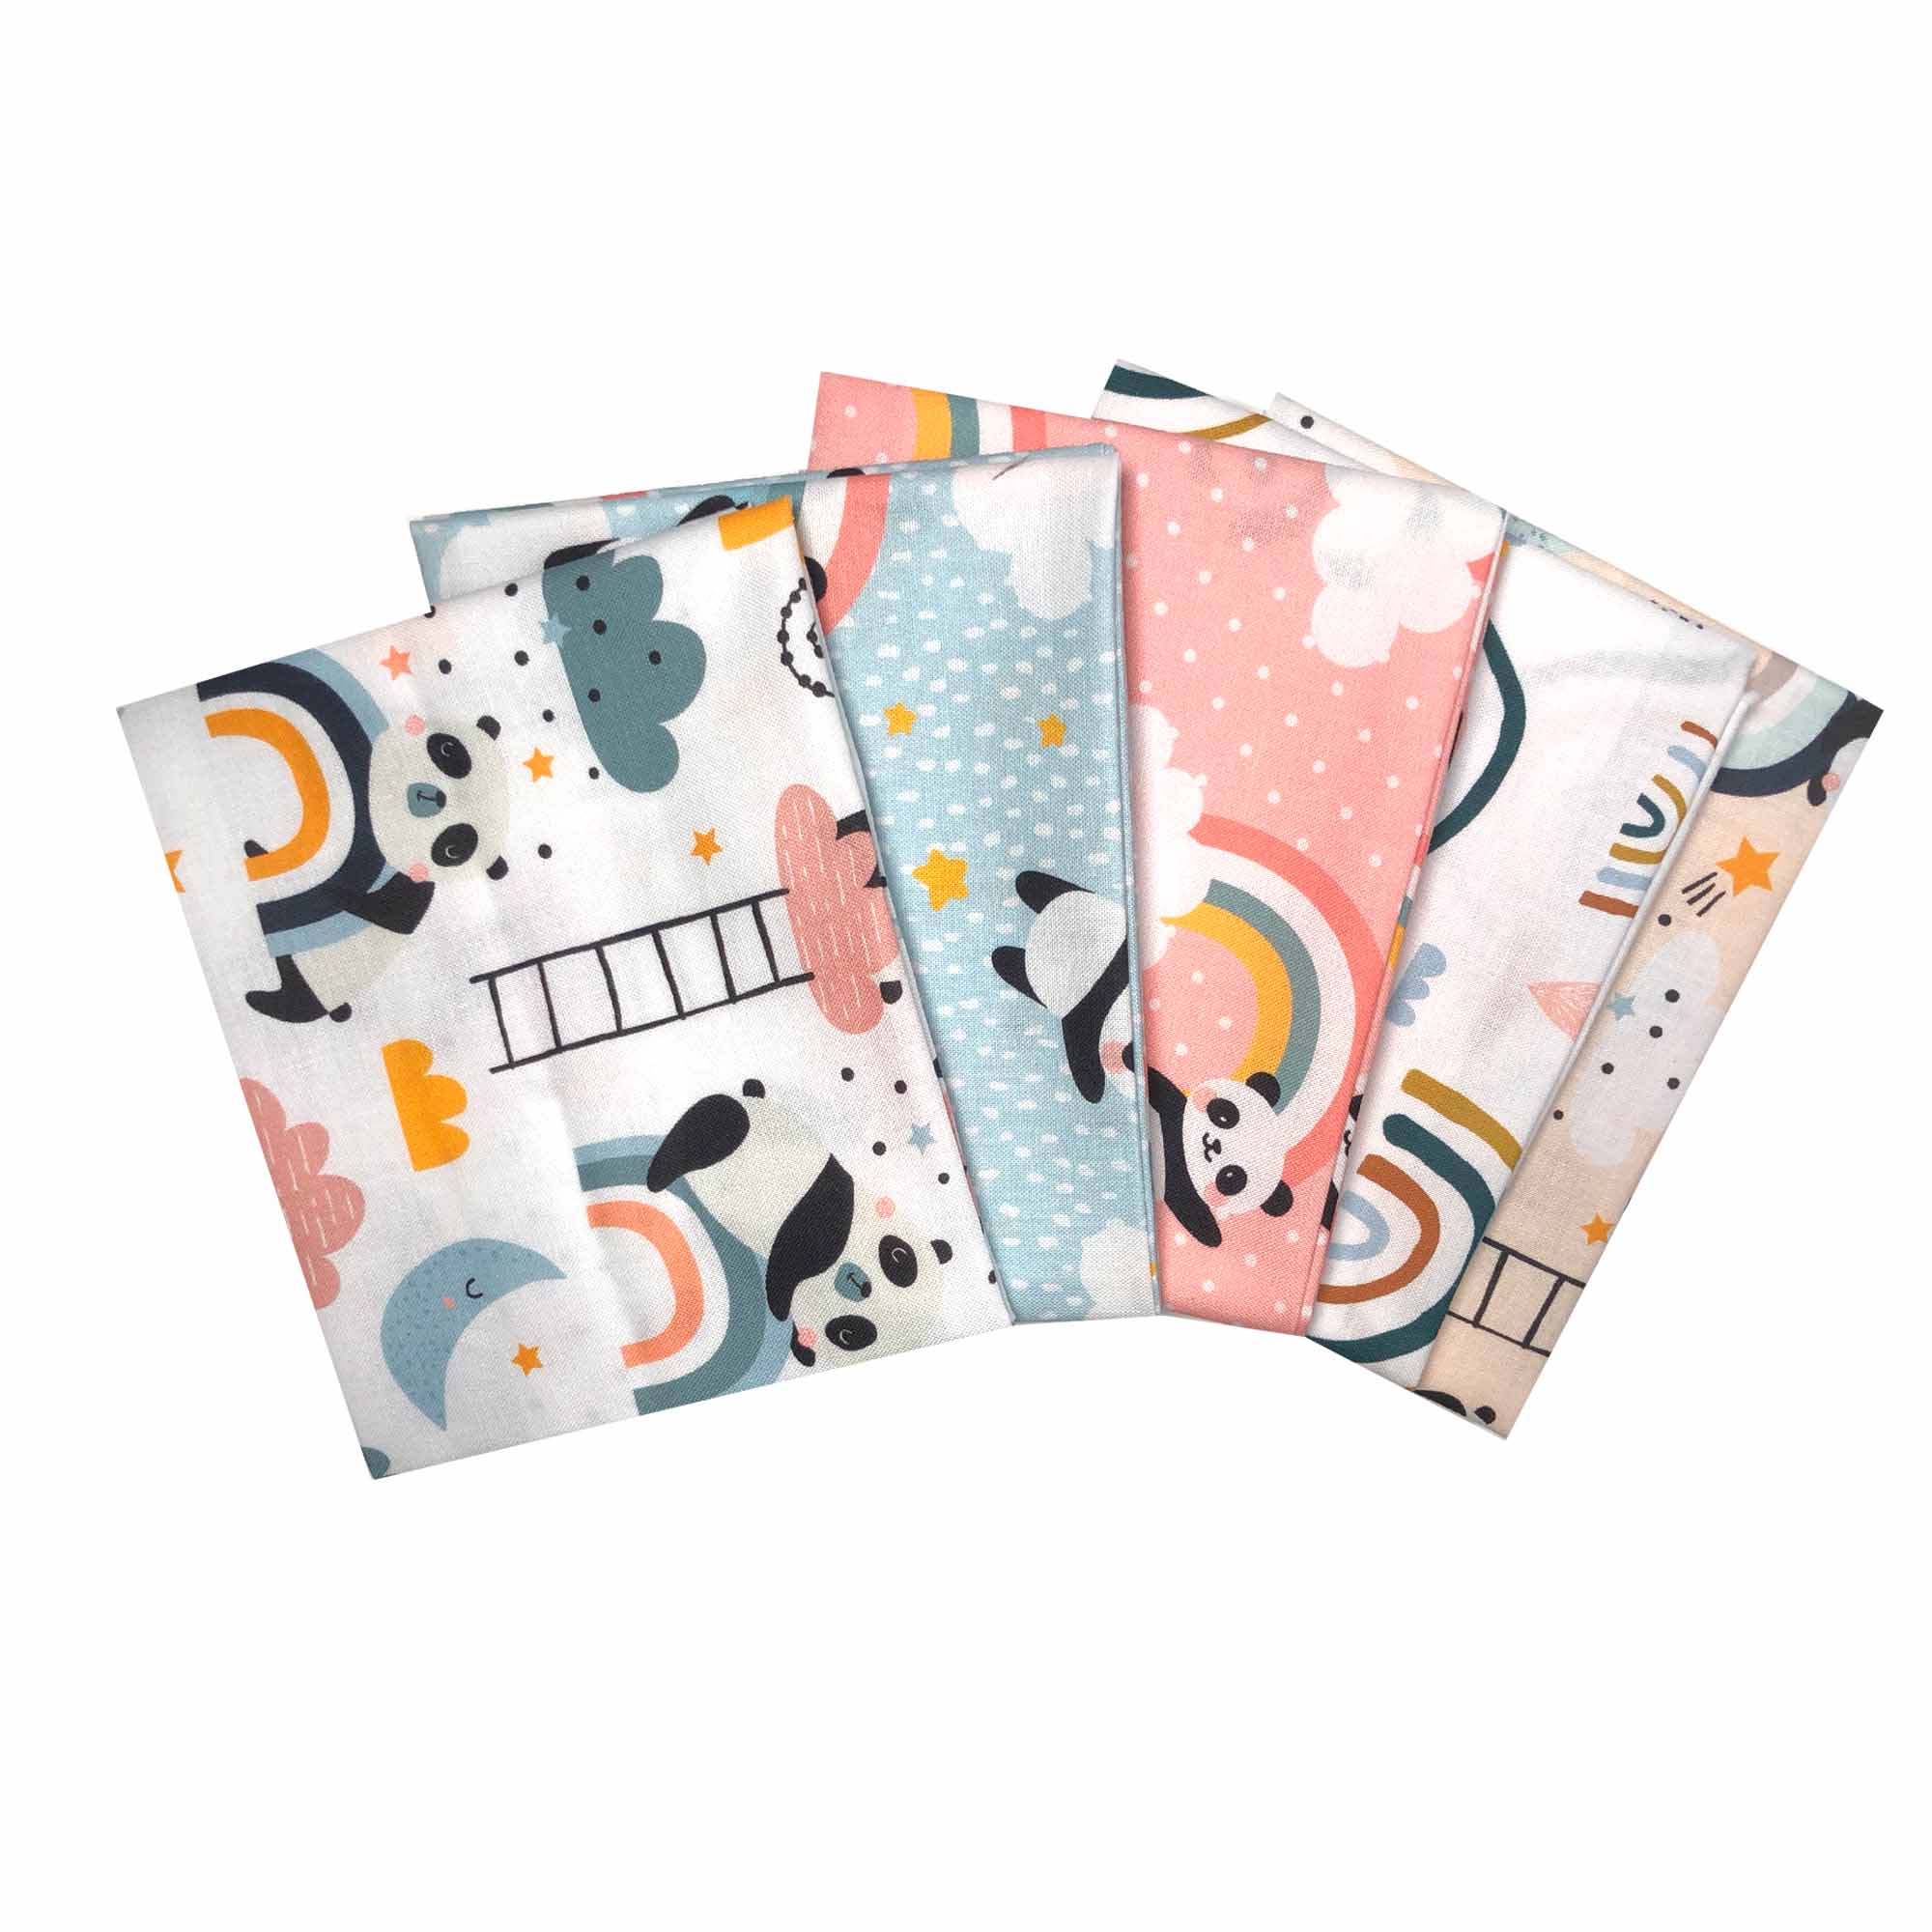 Quilting Fabric - Fat Quarter Bundle - Panda Series by The Craft Cotton Company